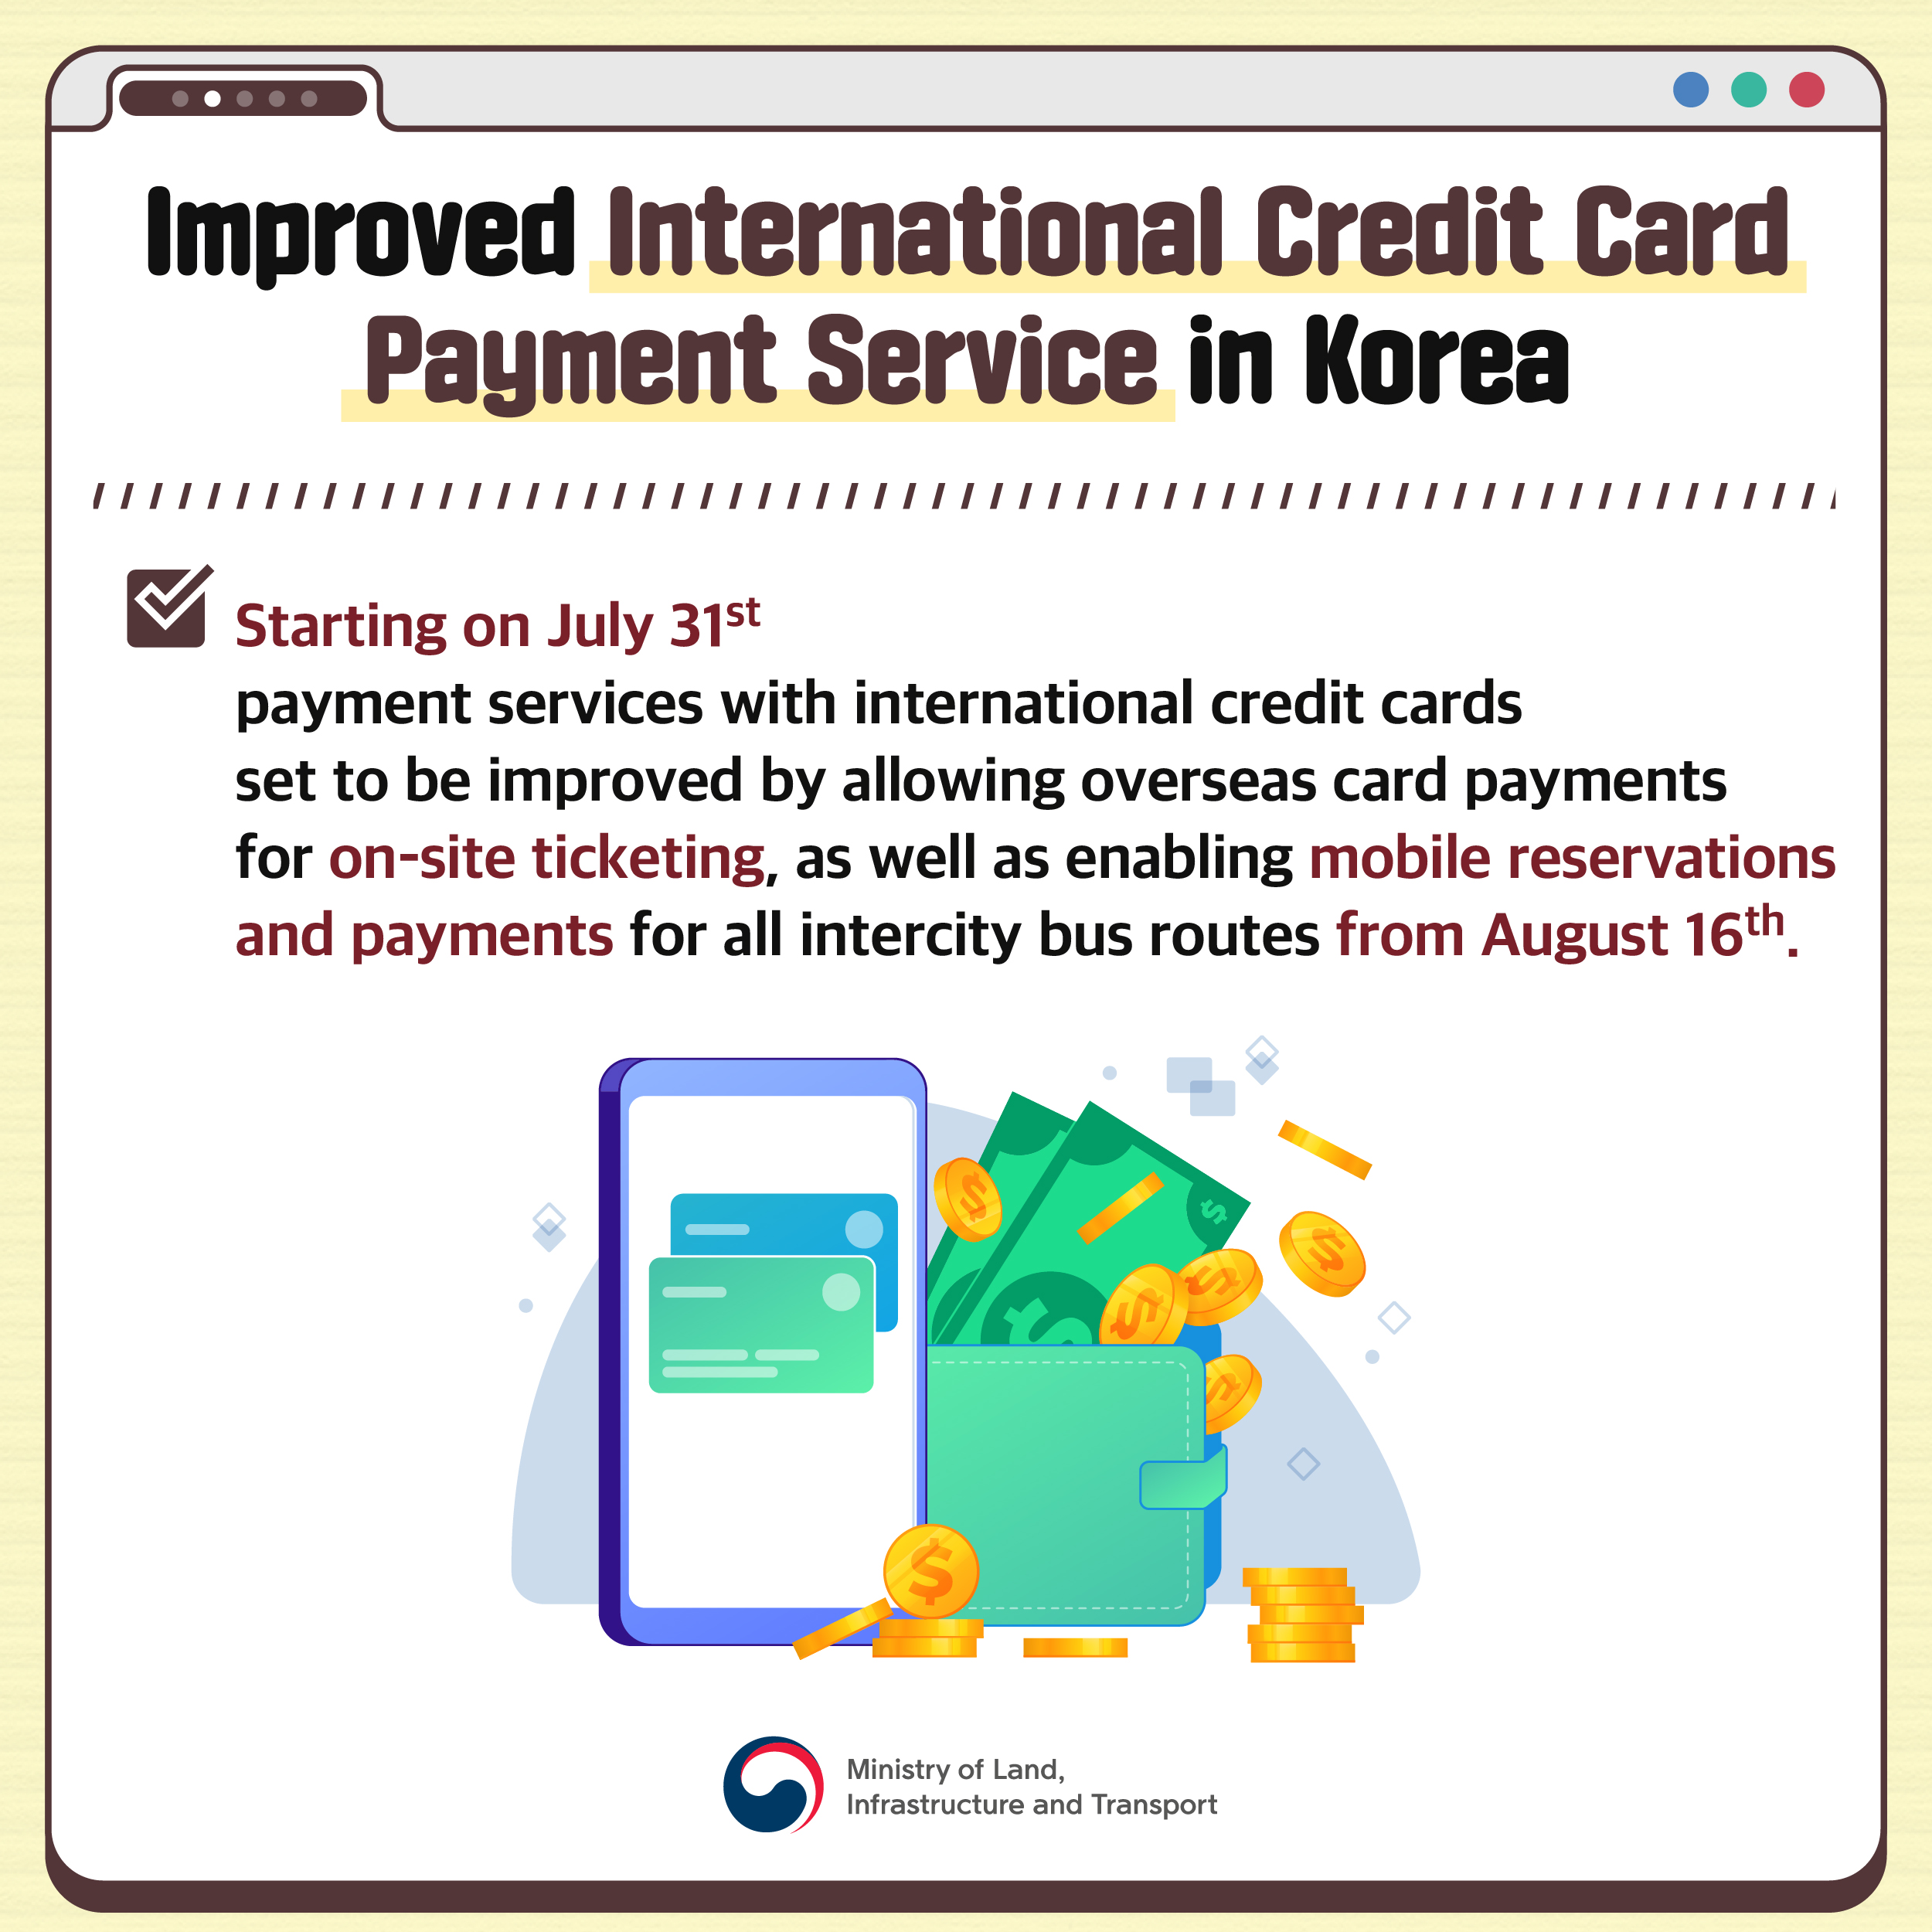 pic 3. Here is the text from the image:

Improved International Credit Card Payment Service in Korea

Starting on July 31st, payment services with international credit cards set to be improved by allowing overseas card payments for on-site ticketing, as well as enabling mobile reservations and payments for all intercity bus routes from August 16th.